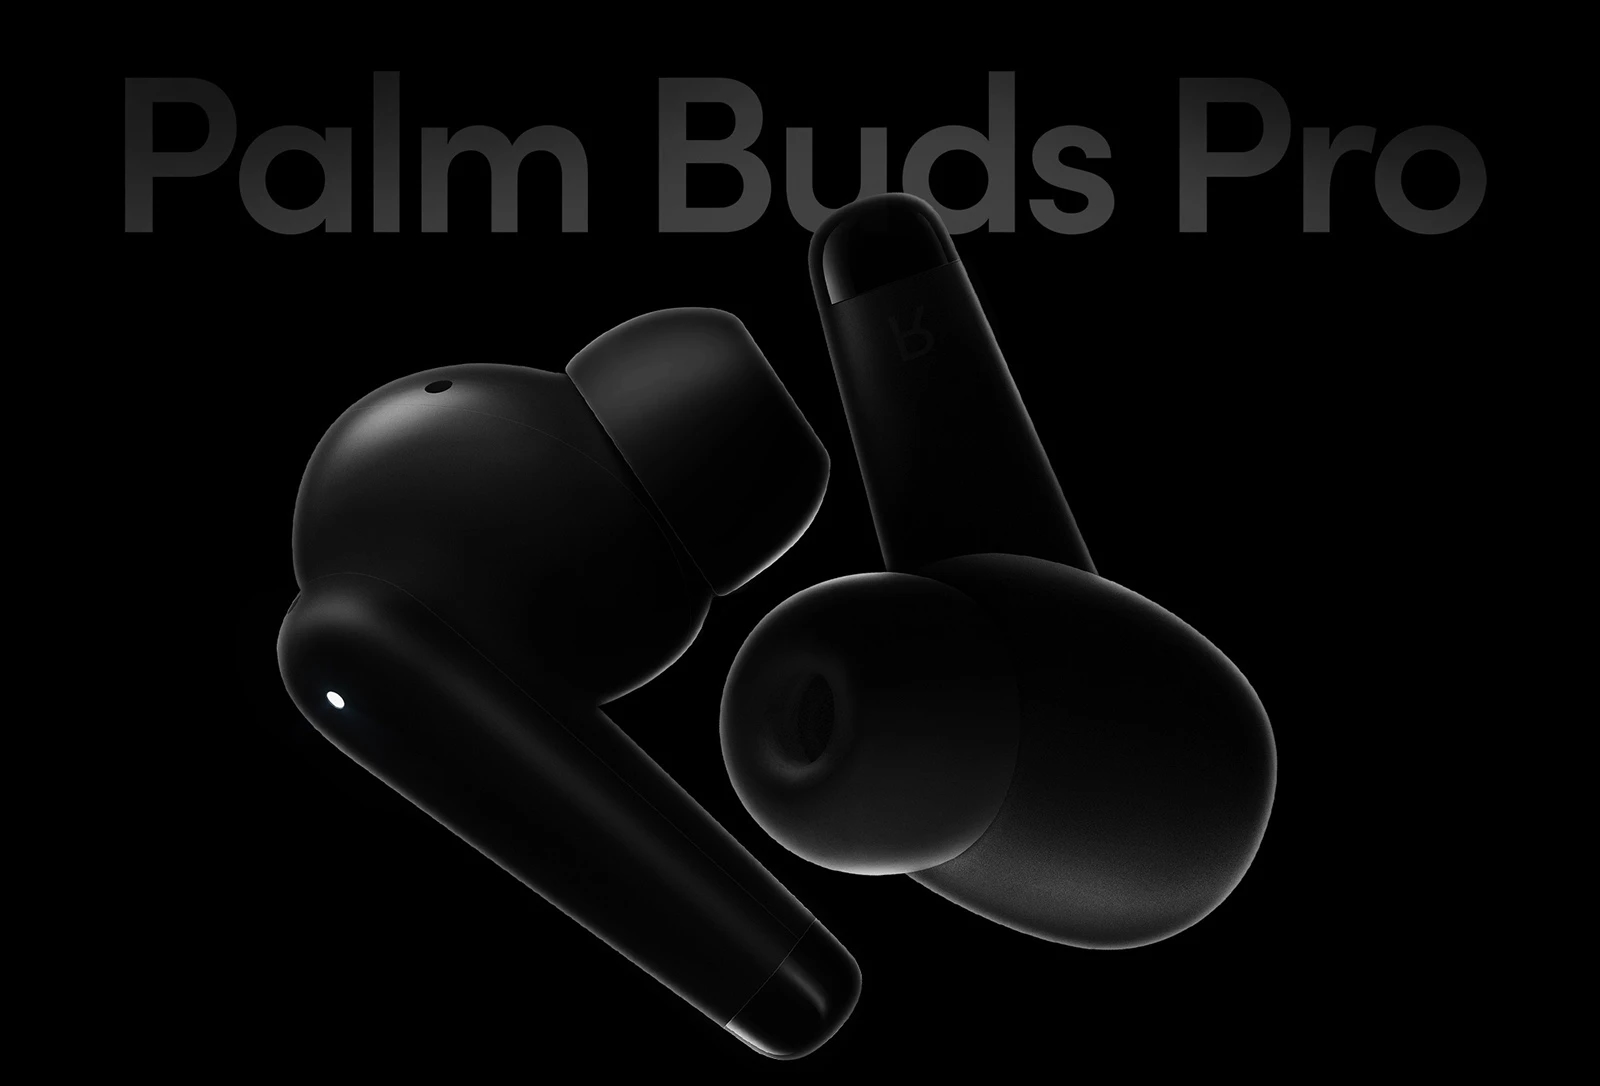 Palm Buds Pro: TWS vacuum headphones with active noise cancellation and battery life up to 24 hours for $99